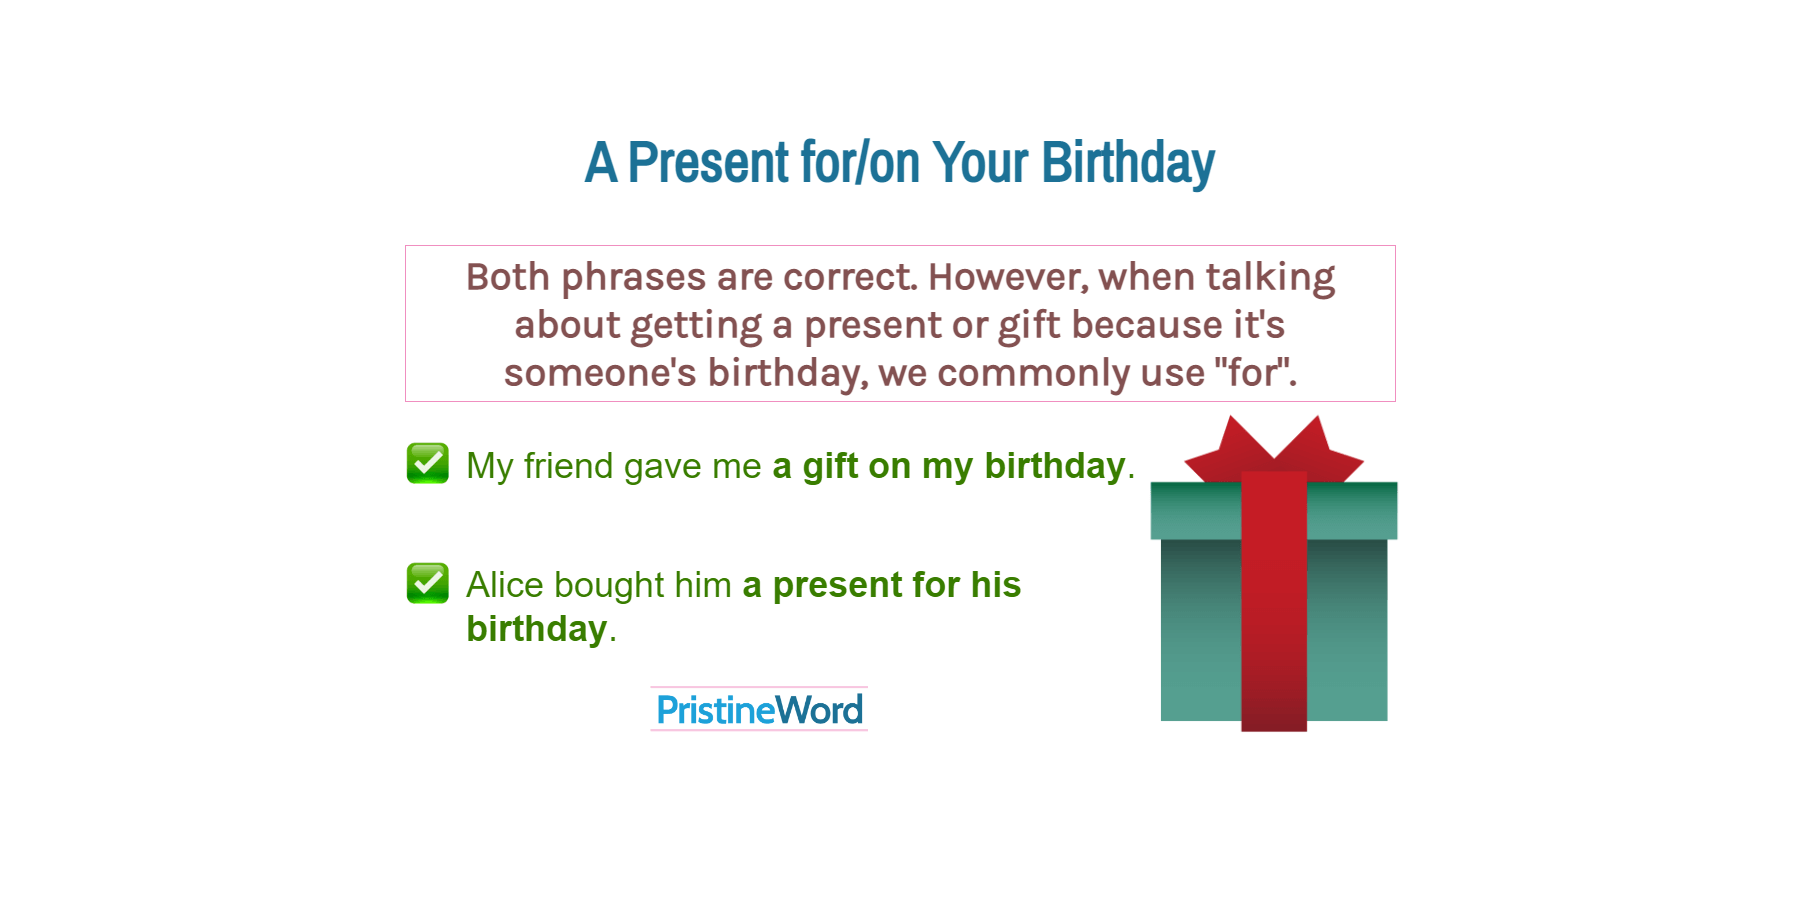 A Present for/on Your Birthday